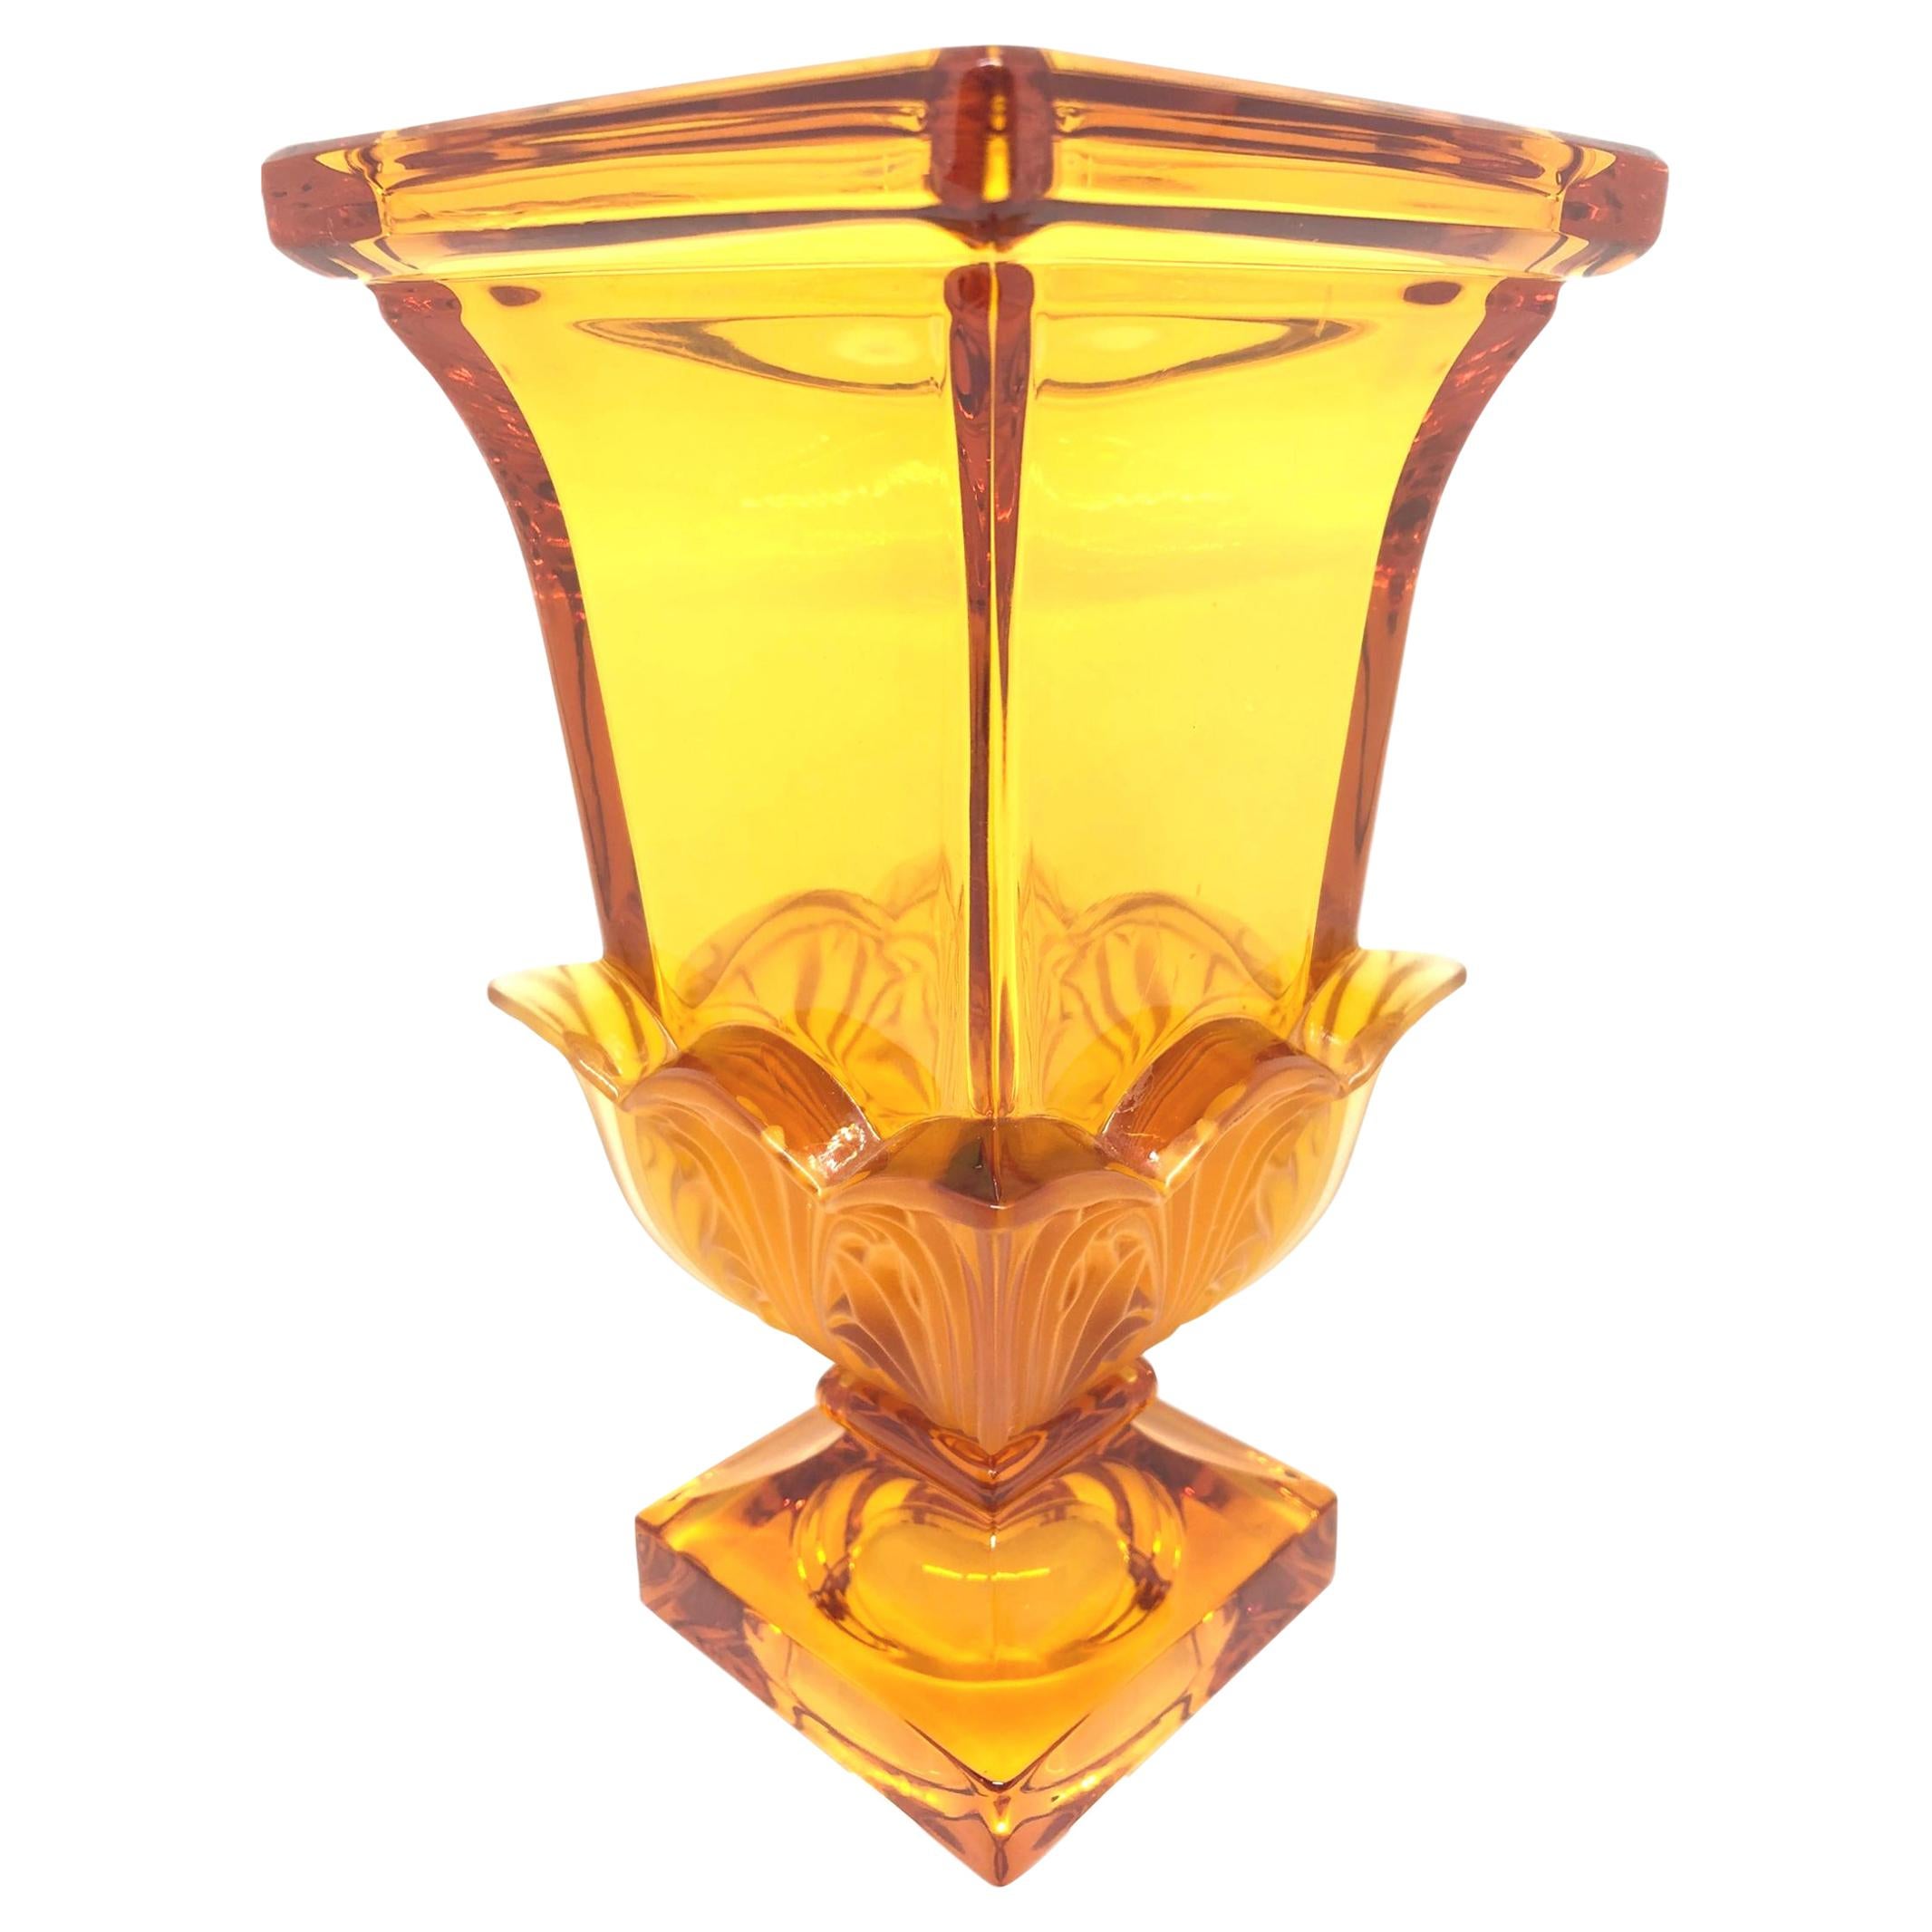 Josephinenhuette Moser Style Amber colored Glass footed Vase Catchall, 1920s